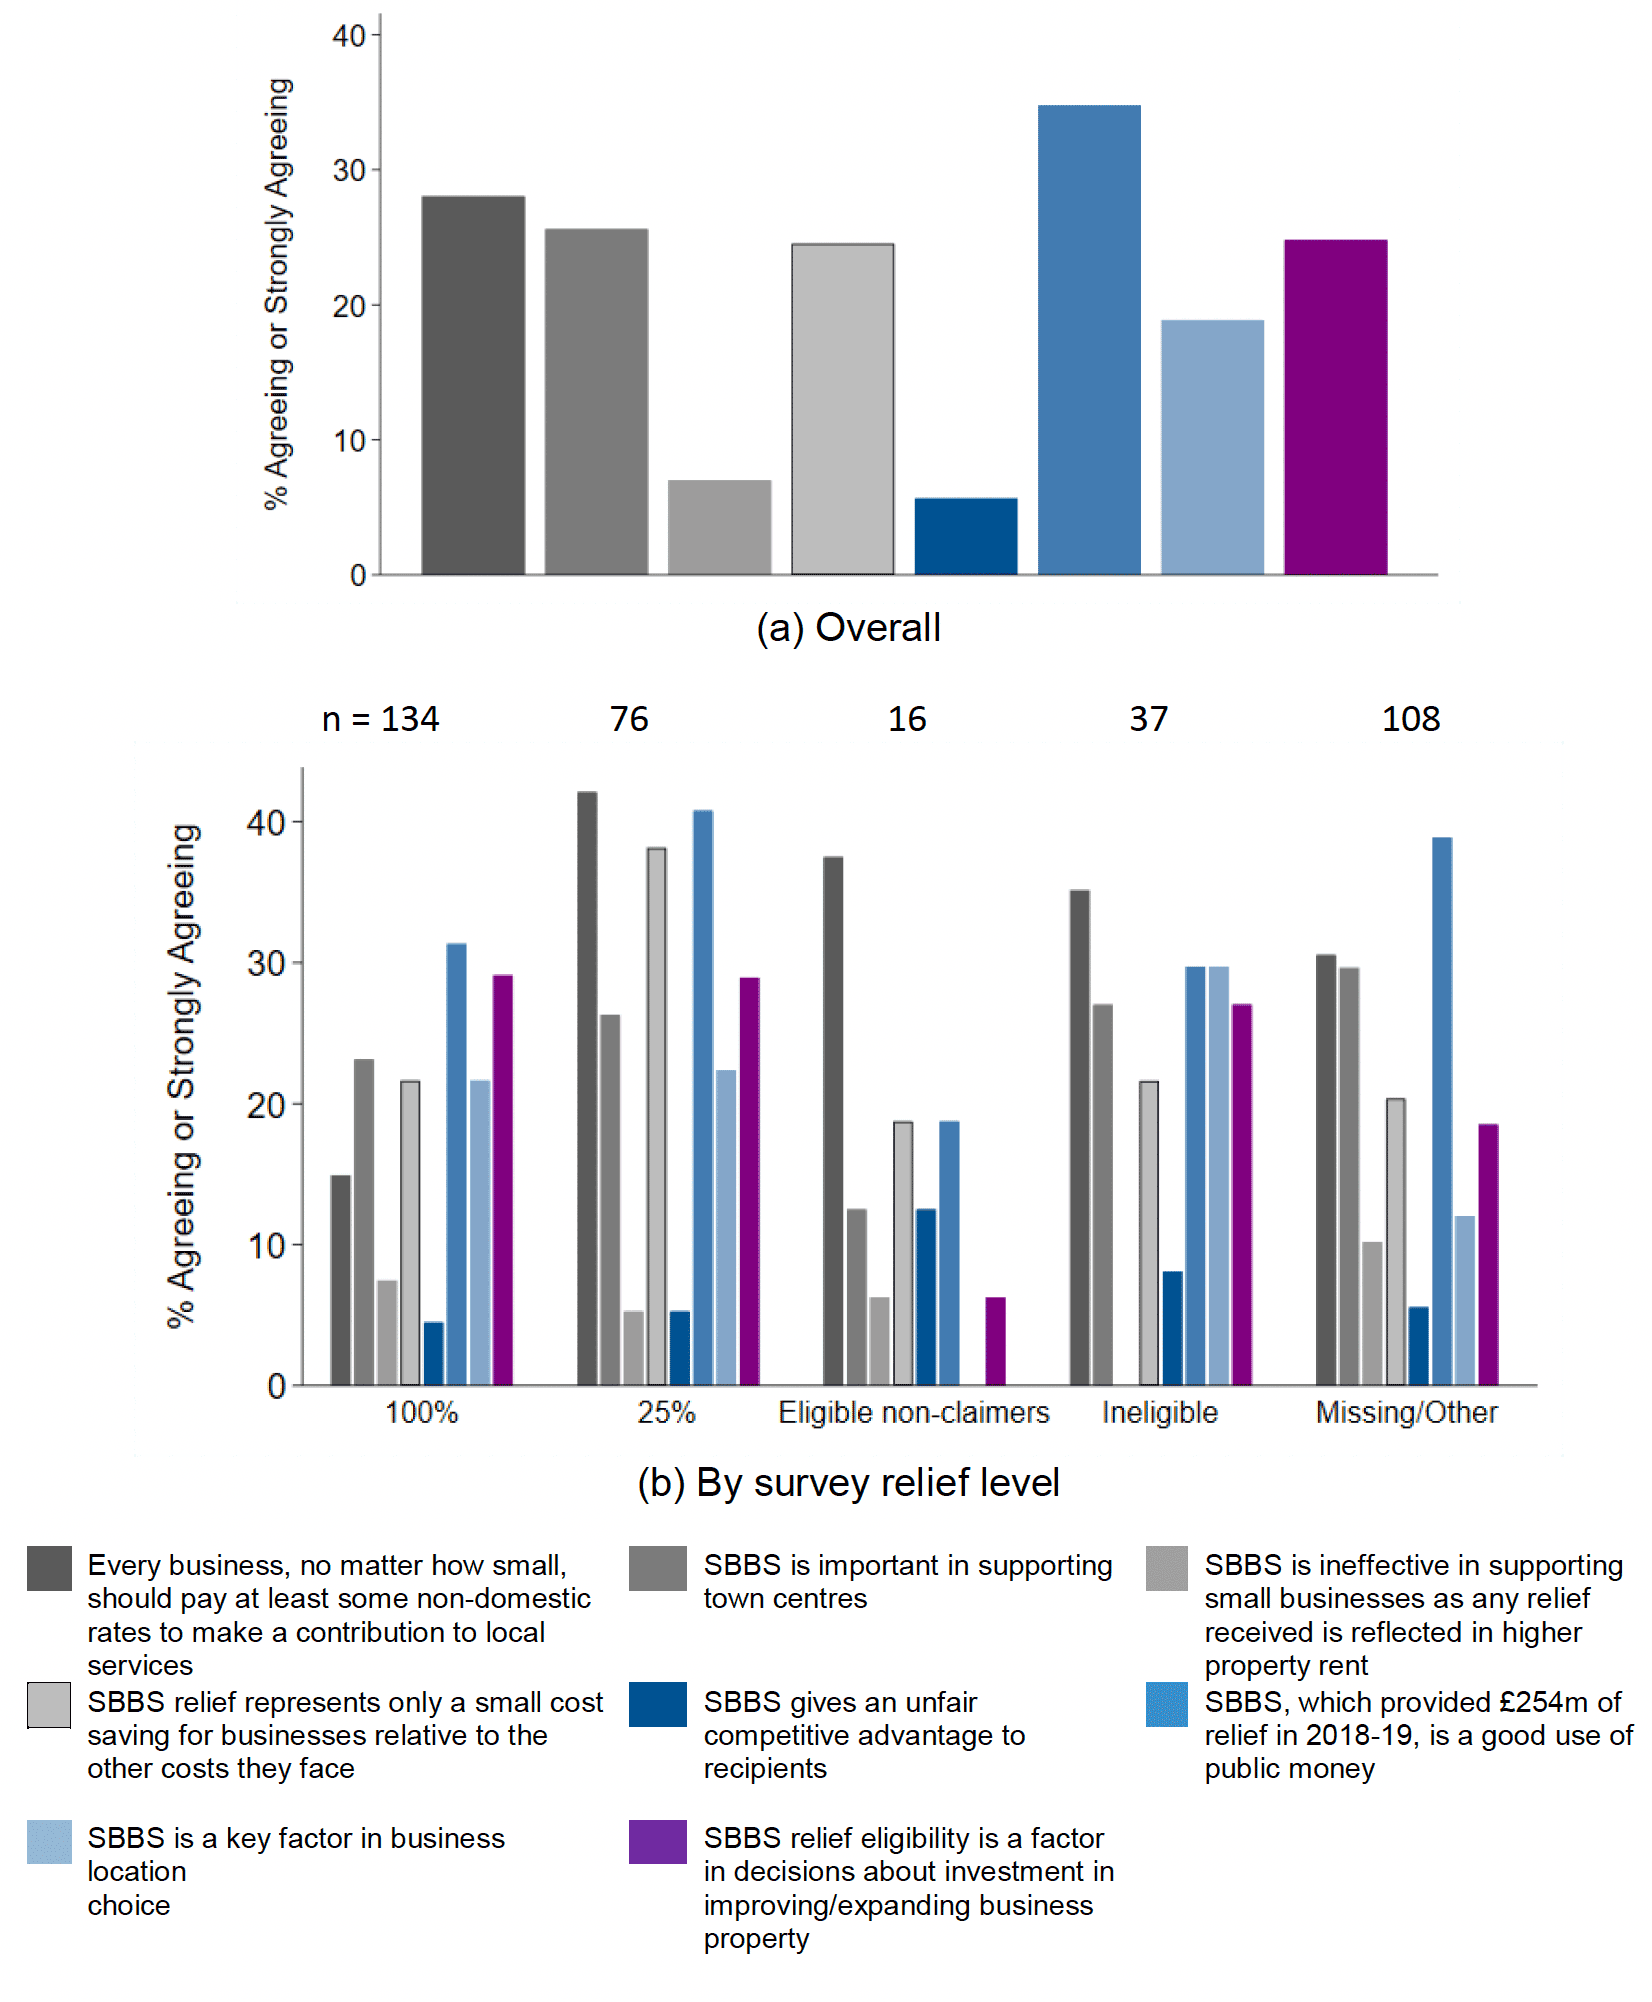 Two bar charts showing the level of agreement with the statements about SBBS, both overall and by type of respondent, showing that there was most agreement with SBBS relief eligibility is a factor in decisions about investment